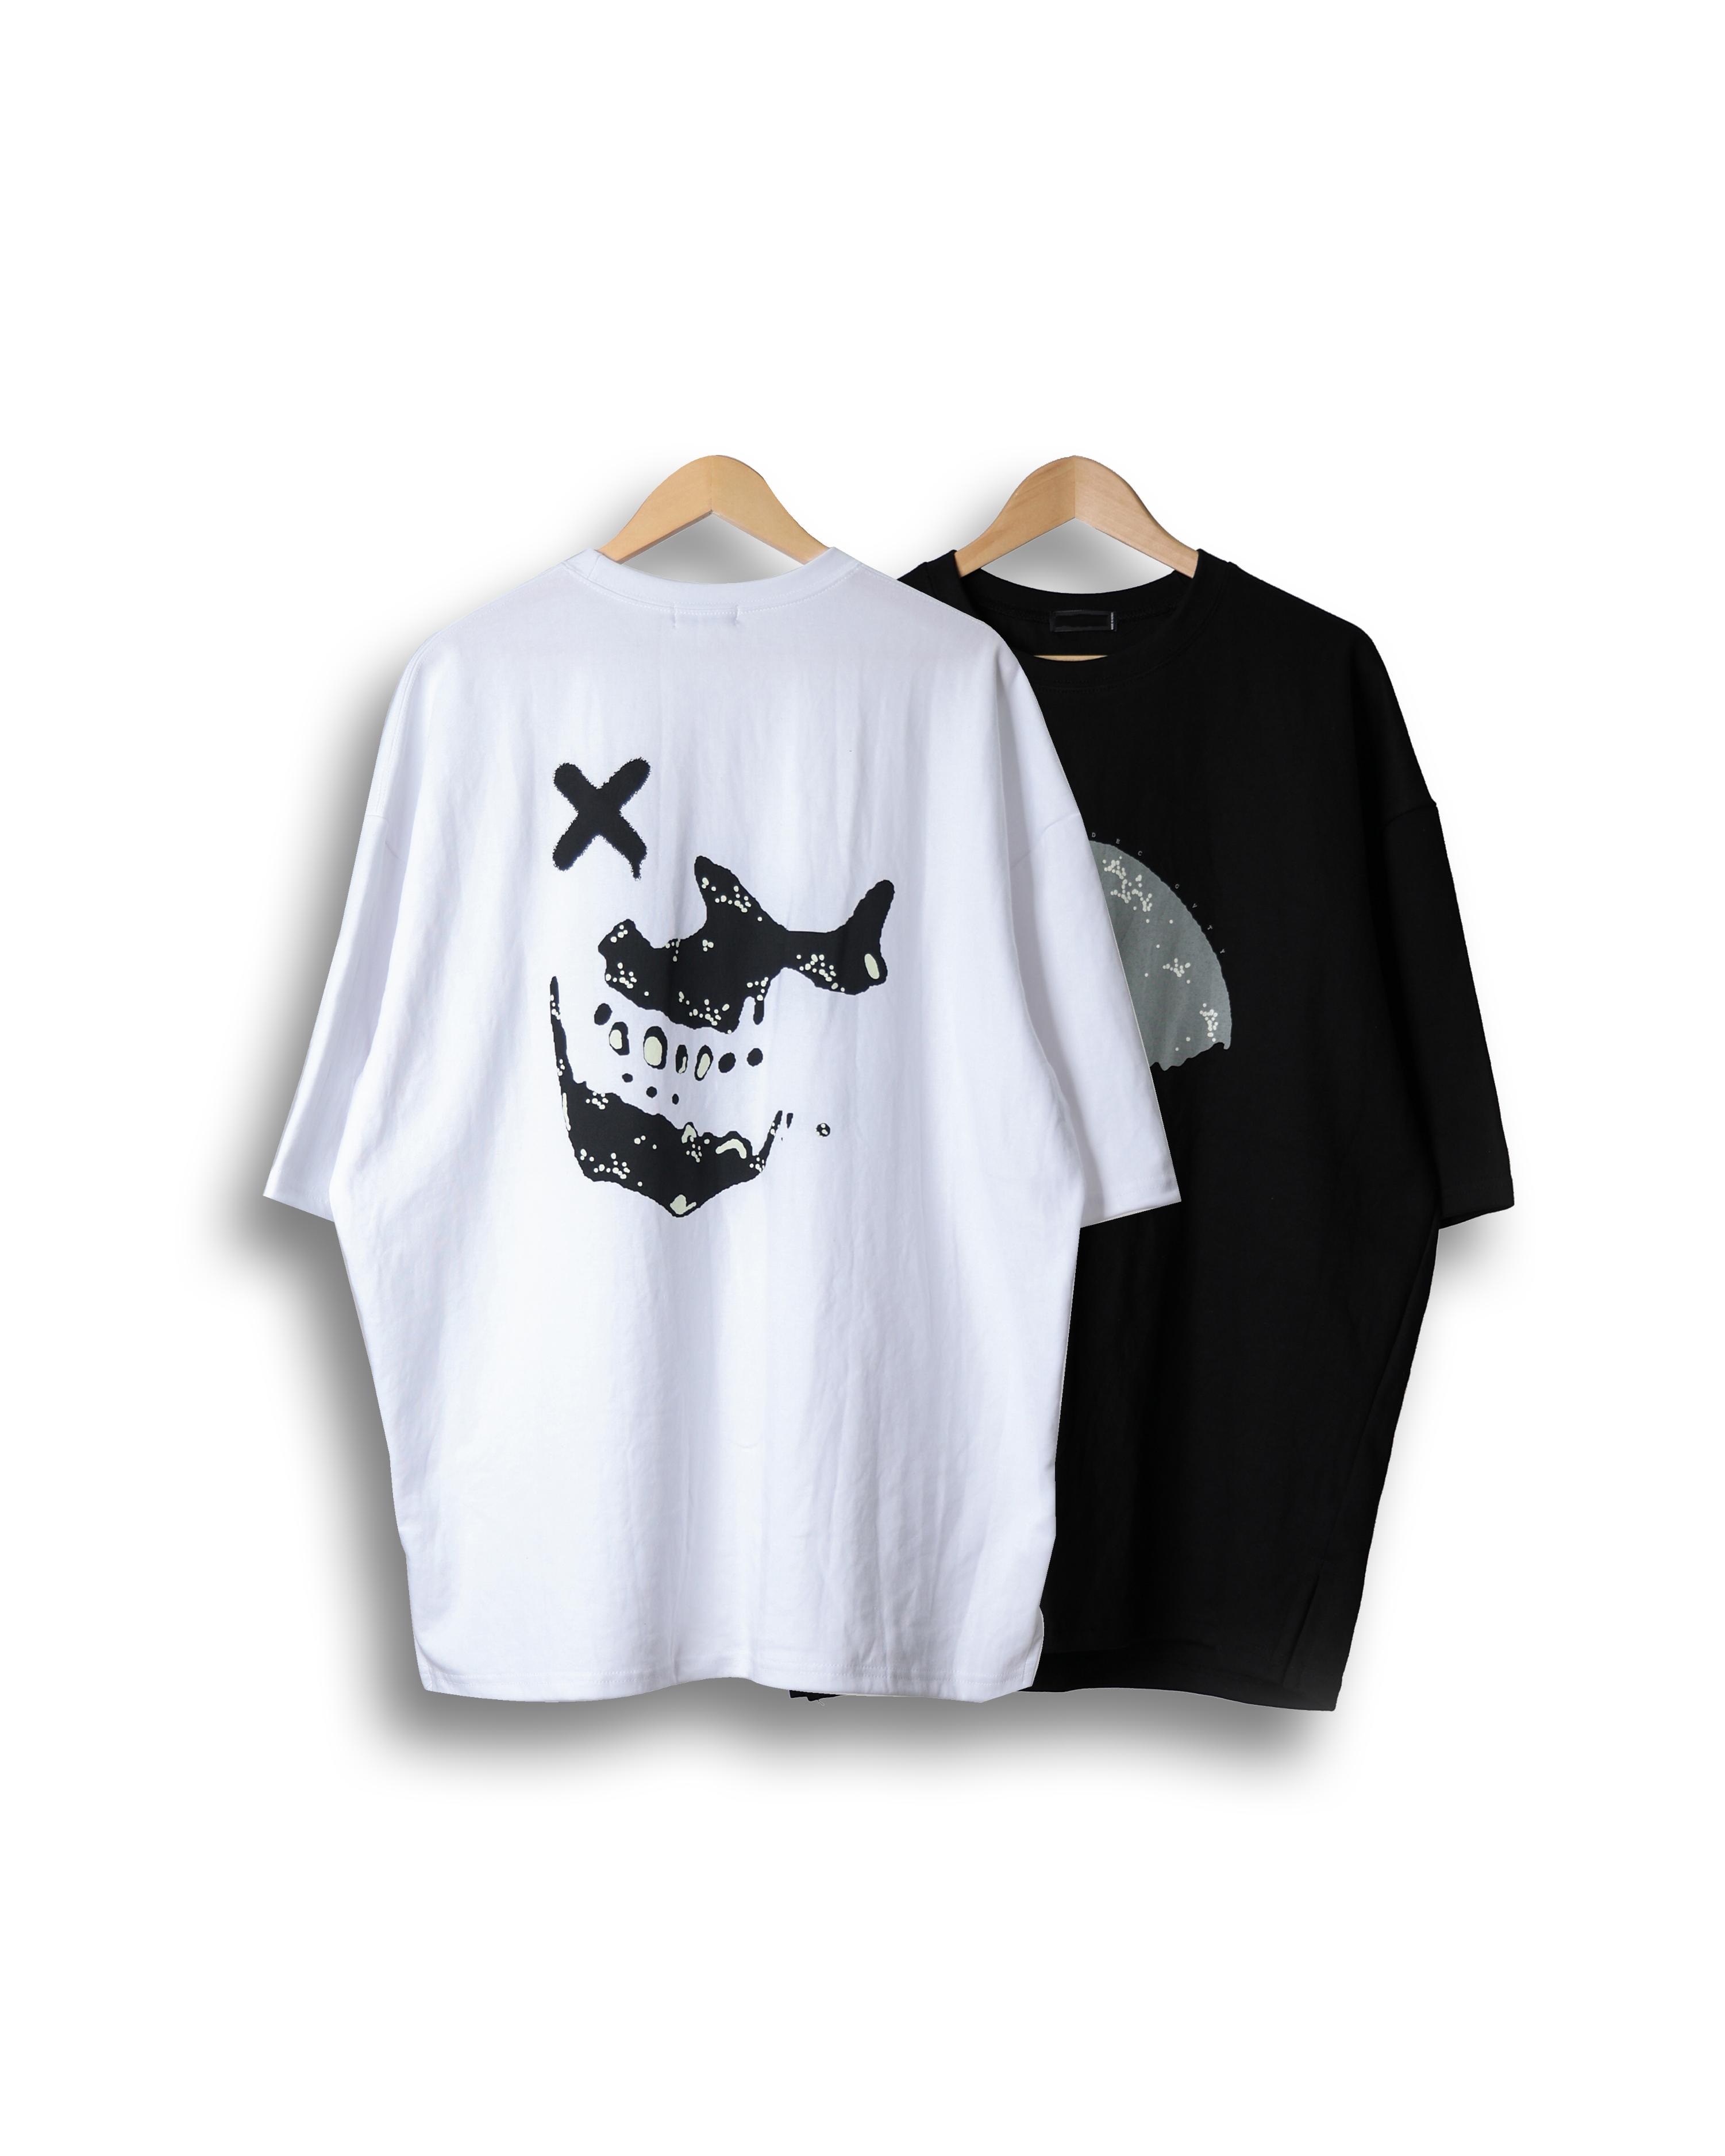 ONOFF Illustrate Skull Over T Shirts (Black/White)